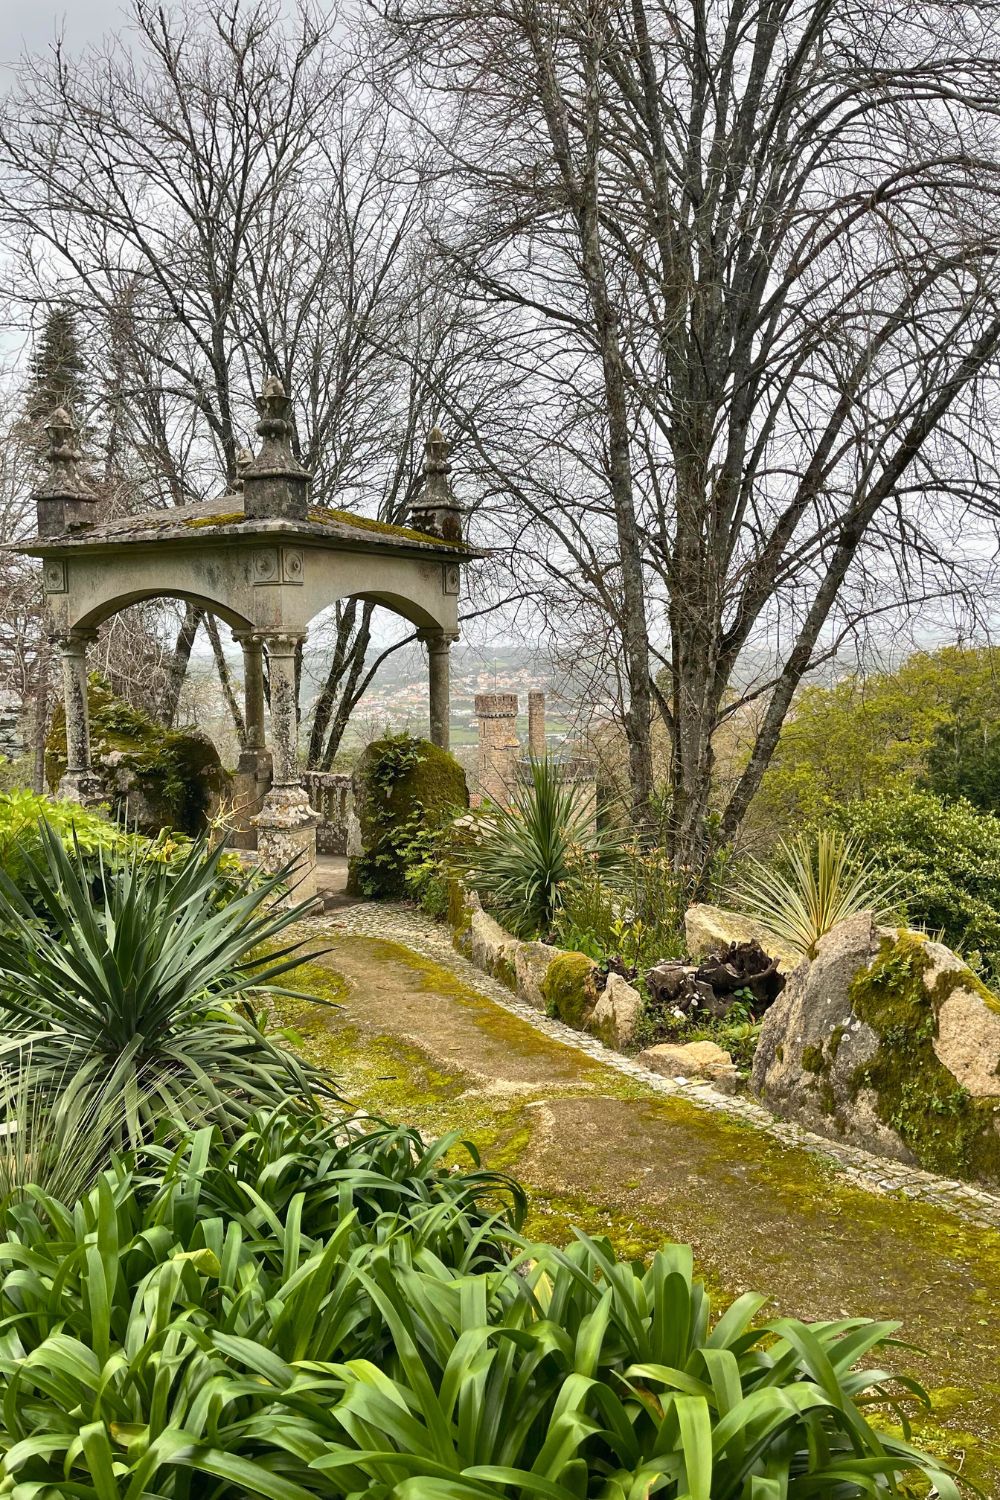 An old stone pergola surrounded by lush greenery and bare trees in what appears to be a tranquil garden setting, with a moss-covered path leading up to it and a view of distant houses in the background, creating a serene and historic atmosphere